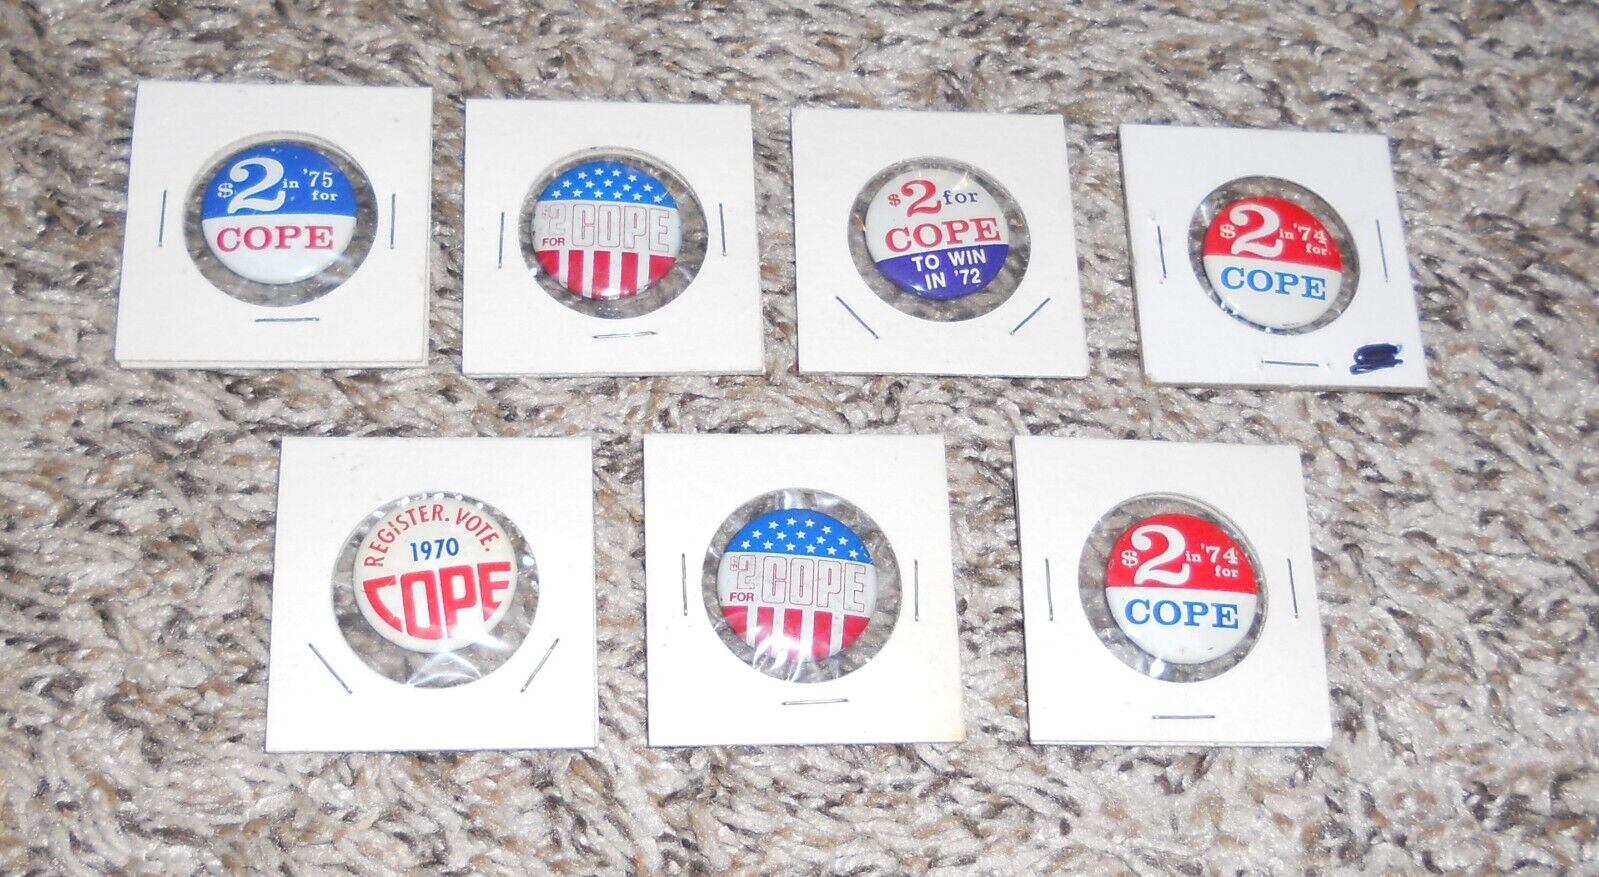 Lot of (7) 1970s $2 For Cope Committee on Political Education Union Pins Buttons